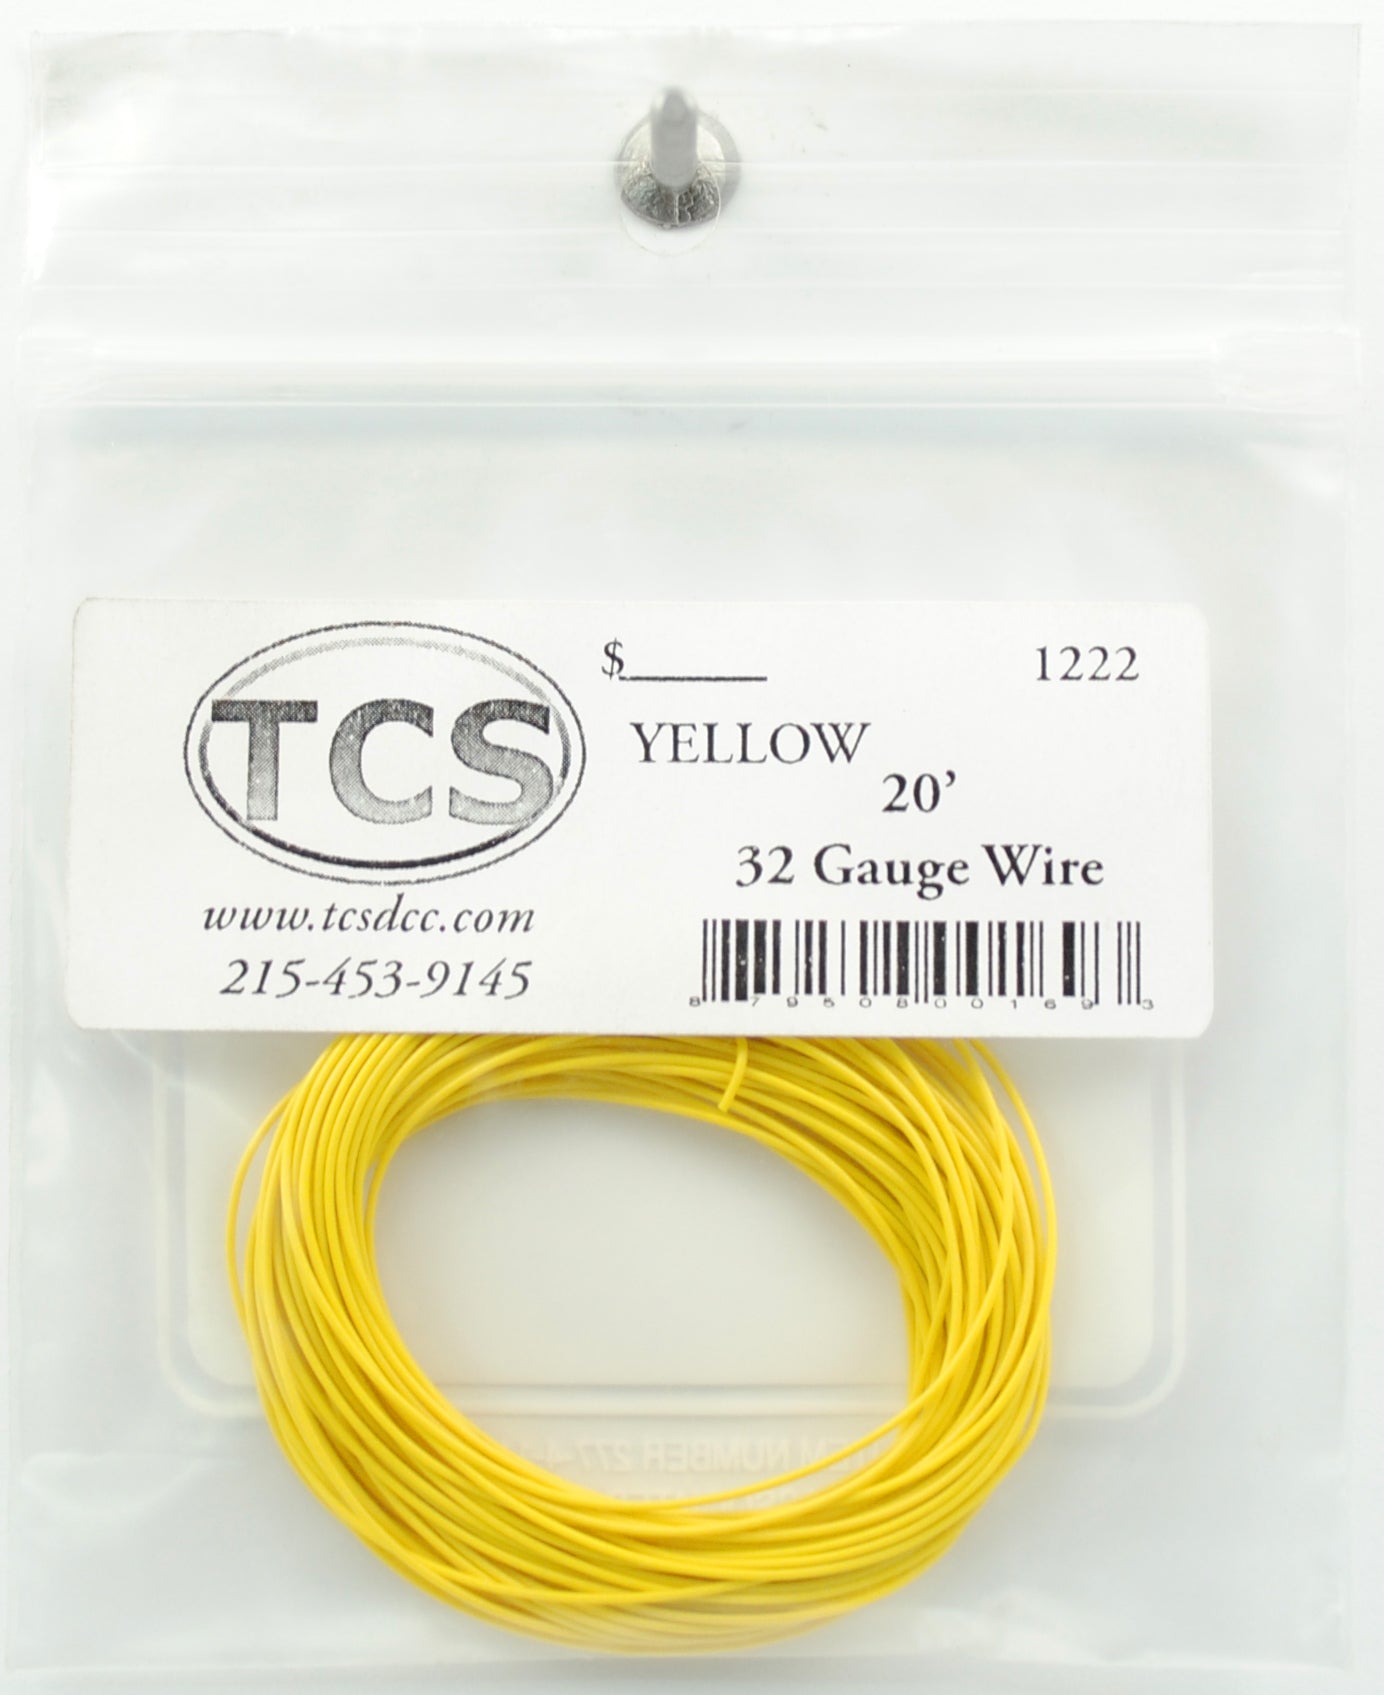 Train Control Systems 1222 20' of 32 Gauge Wire, Yellow